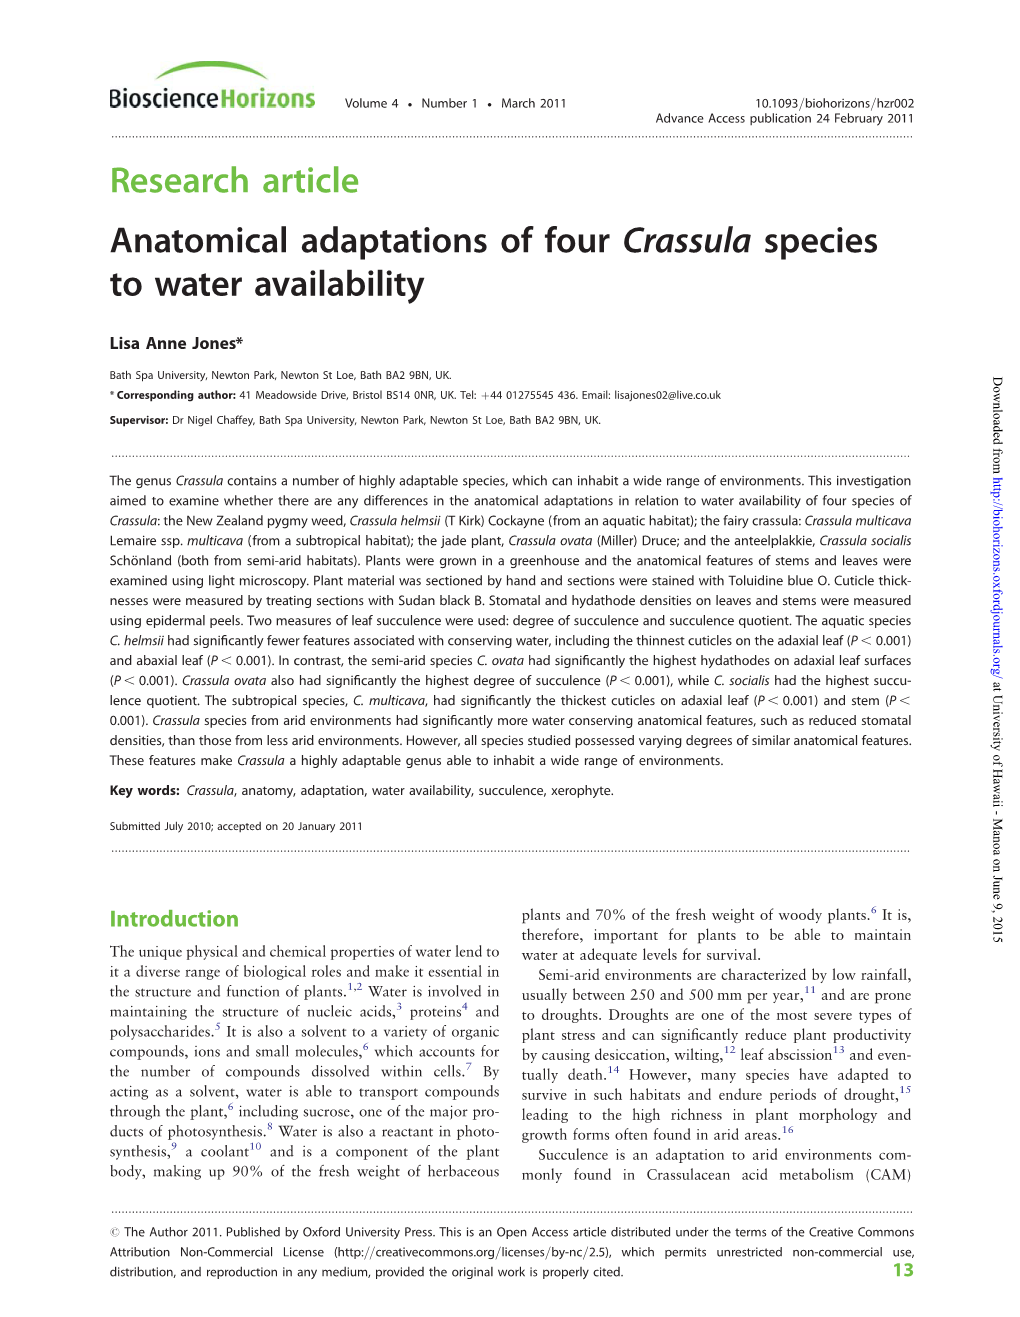 Research Article Anatomical Adaptations of Four Crassula Species to Water Availability